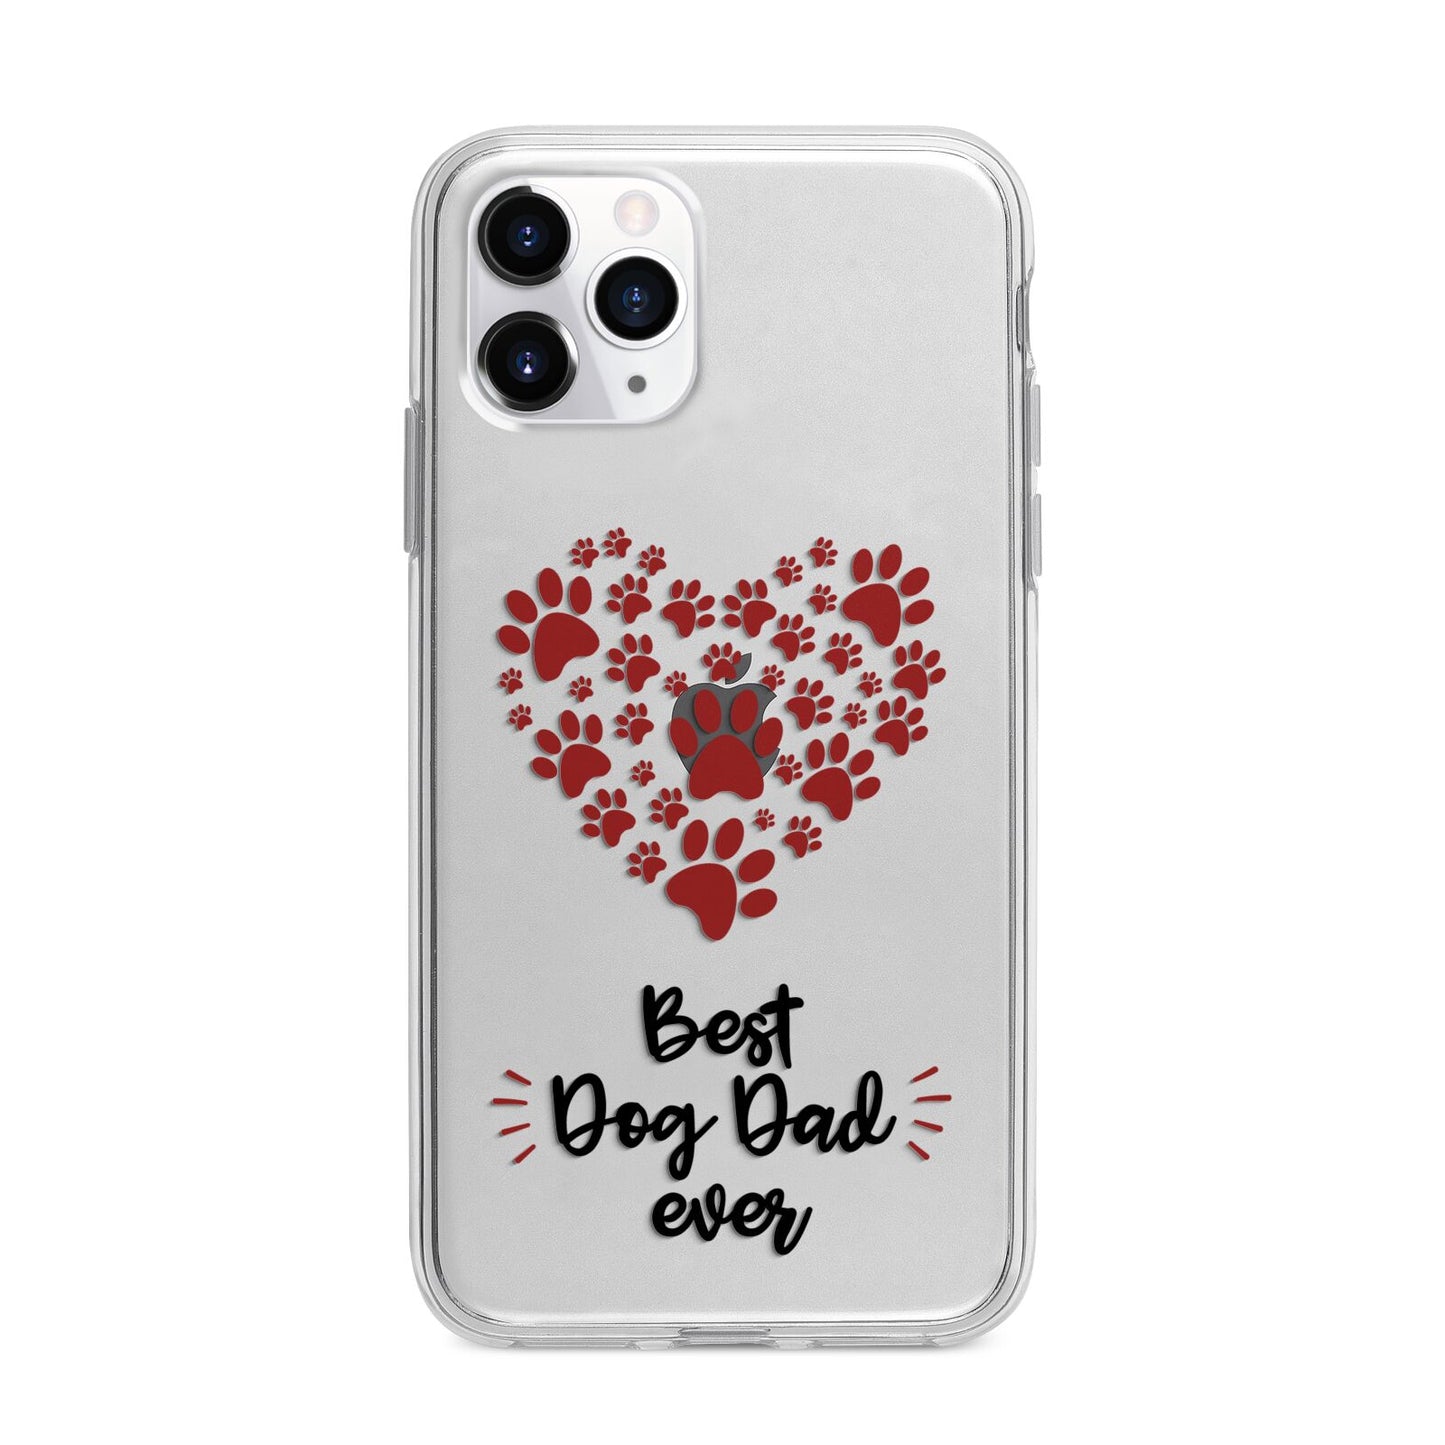 Best Dog Dad Paws Apple iPhone 11 Pro Max in Silver with Bumper Case